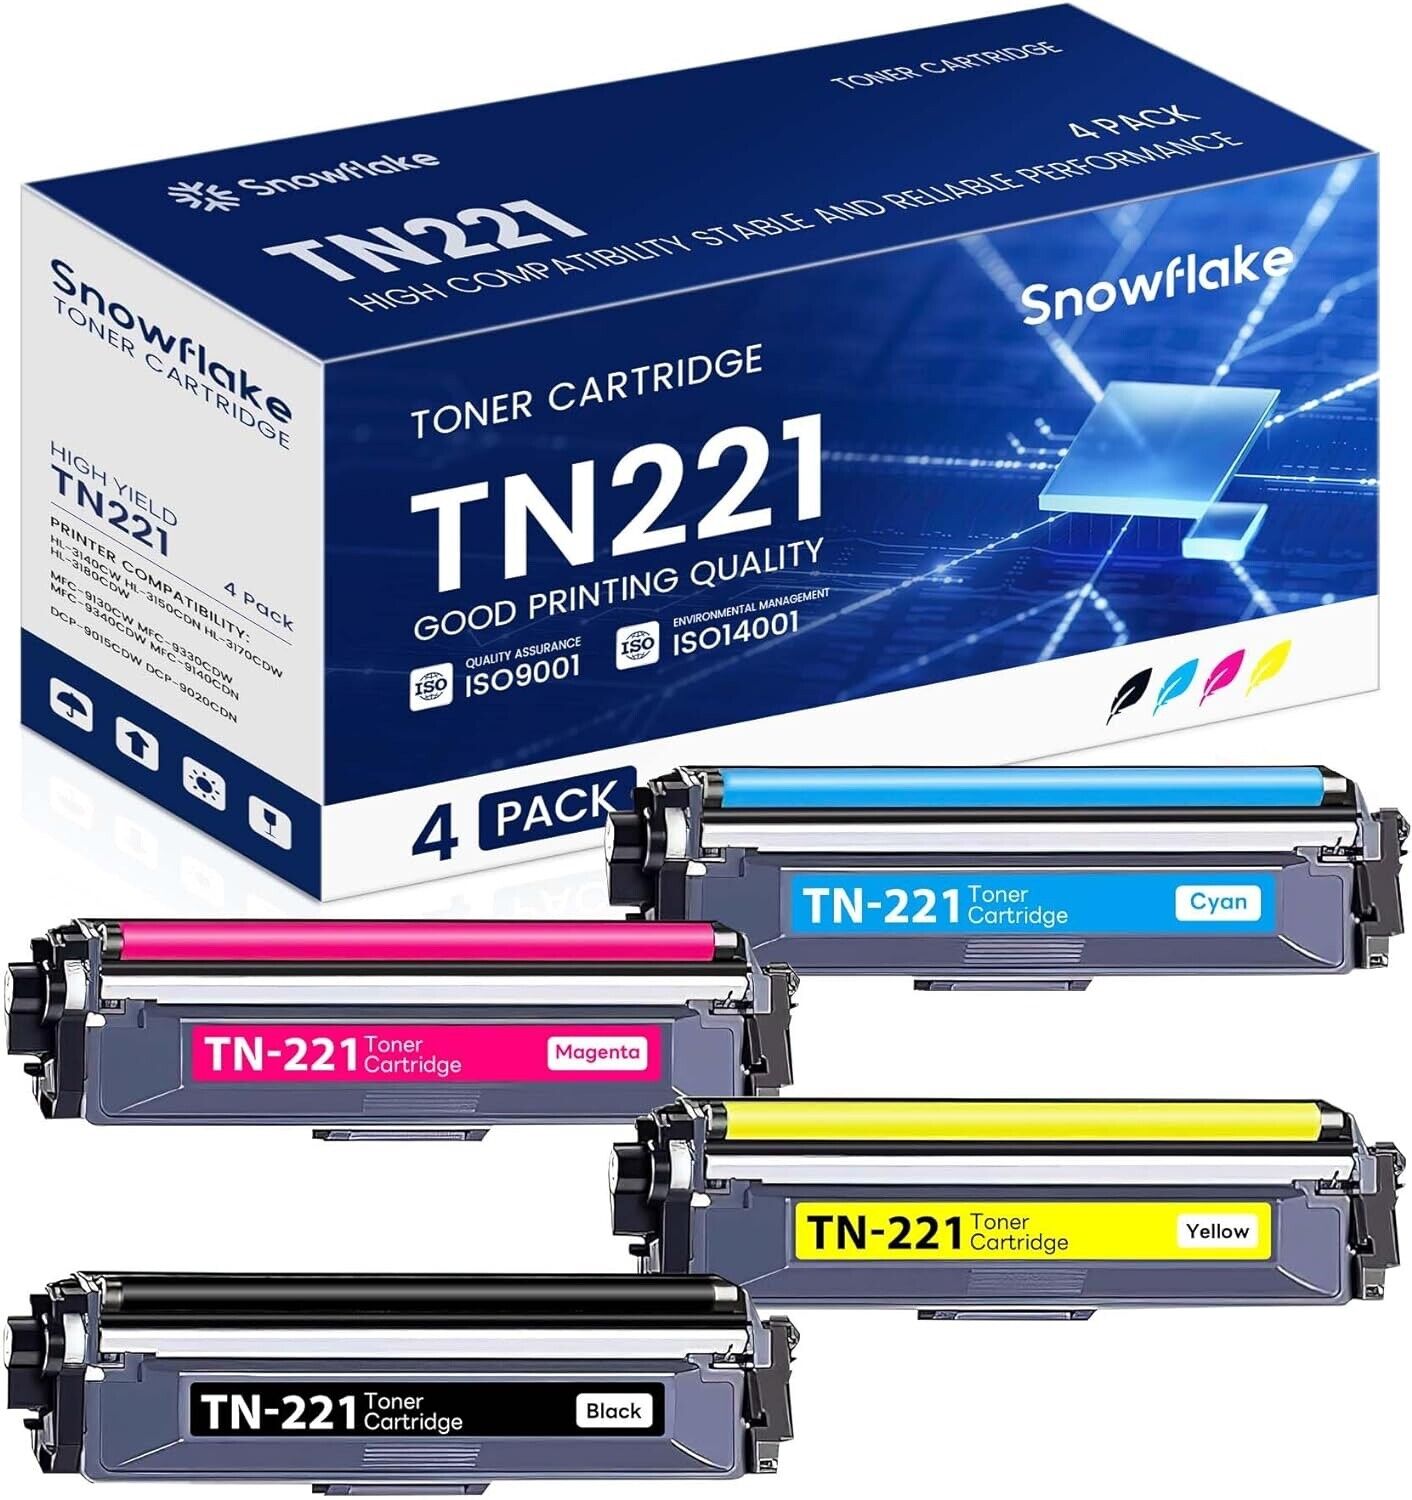 TN221 4-Pack Toner Set for Brother - High Quality, Vibrant Prints - NEW